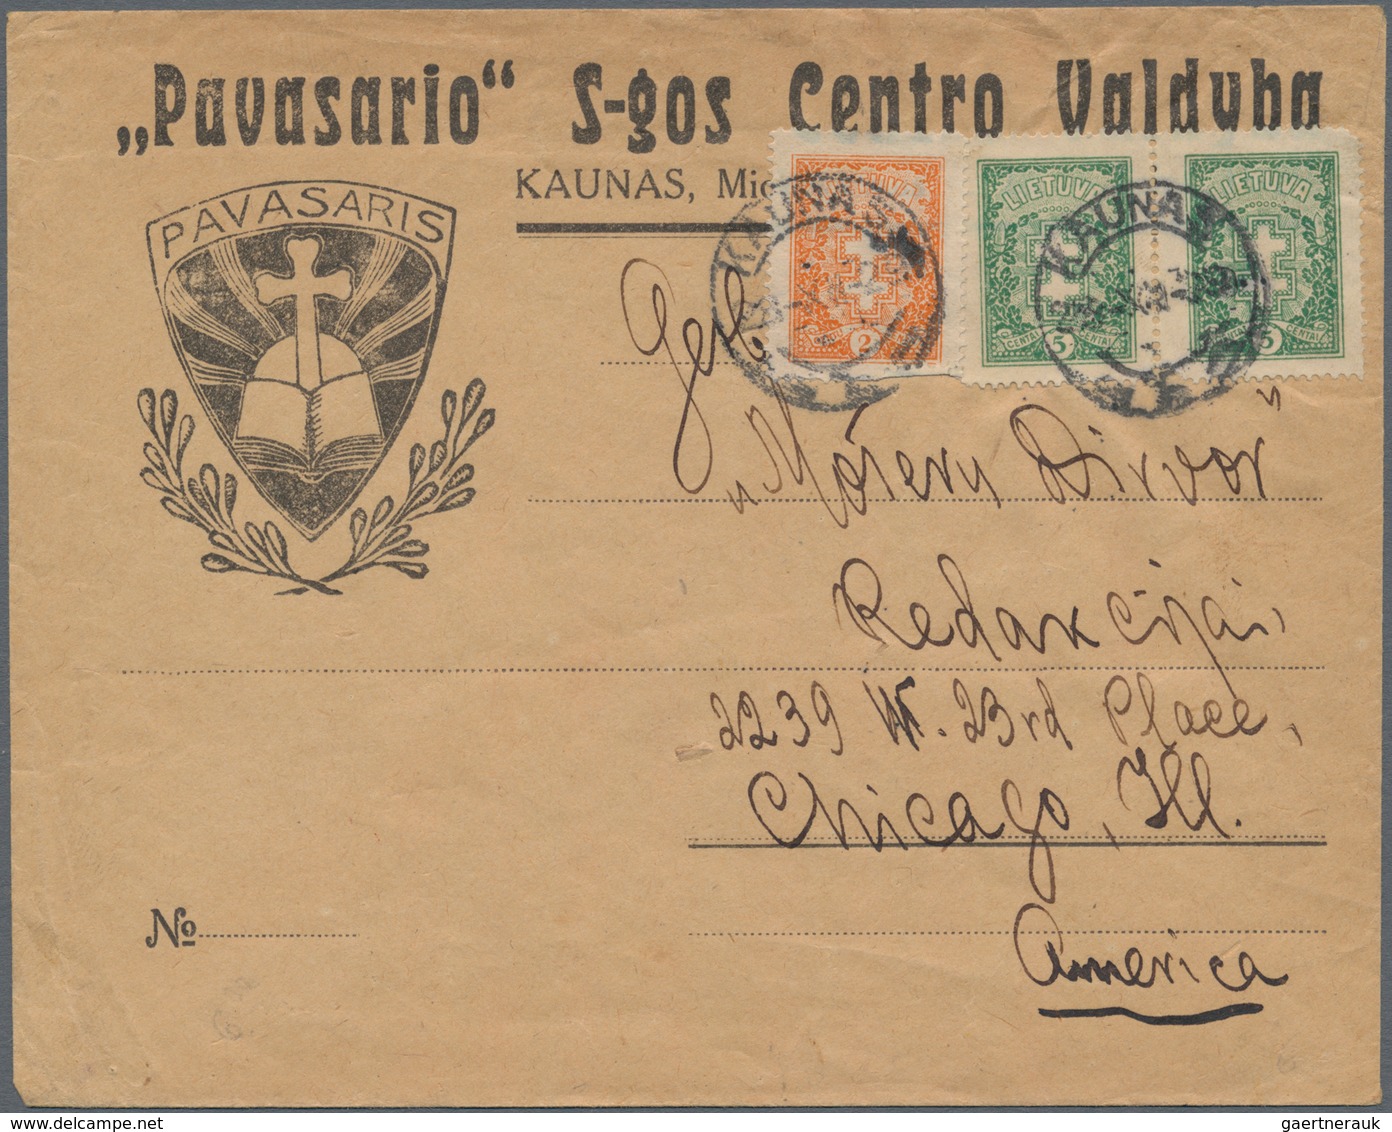 Litauen: 1919-1940's ca.: About 150 covers and postcards from various post offices in Lithuania, mos